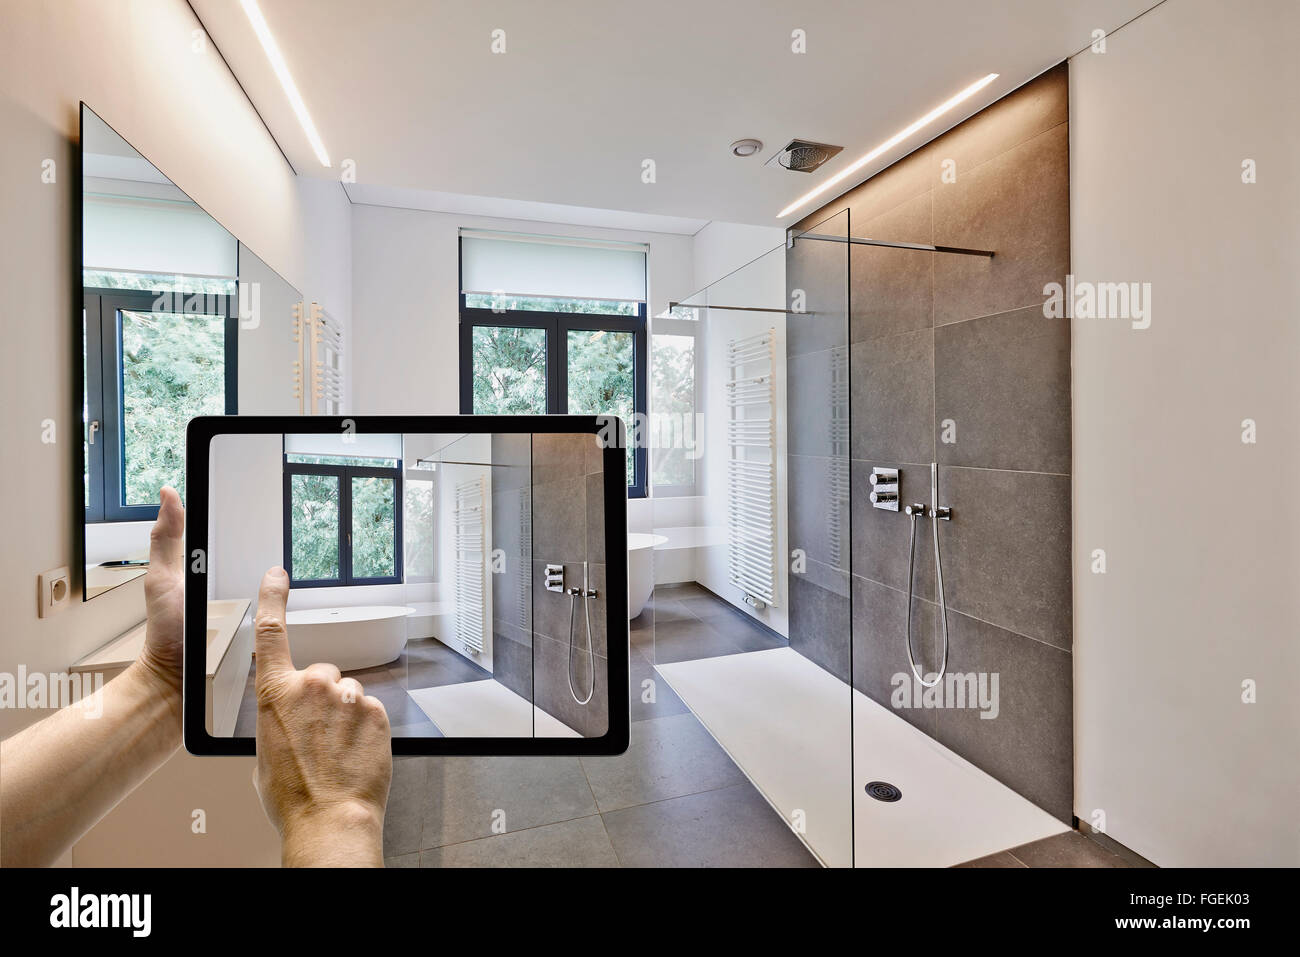 Mobile device with man hands taking picture in  tiled bathroom with windows towards garden Stock Photo